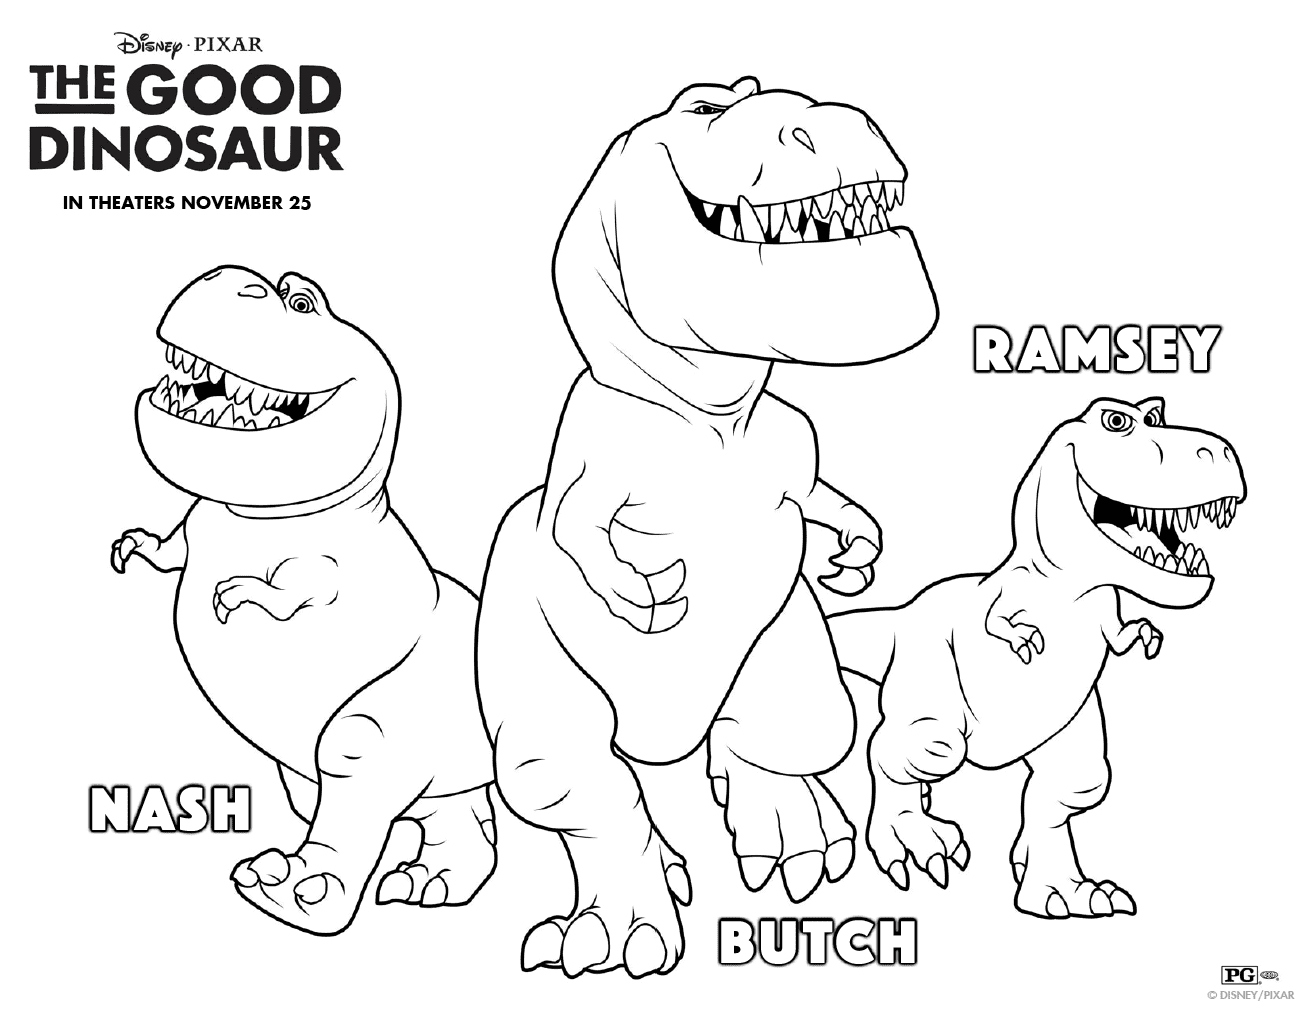 Nash, Butch And Ramsey From The Good Dinosaur Coloring Pages